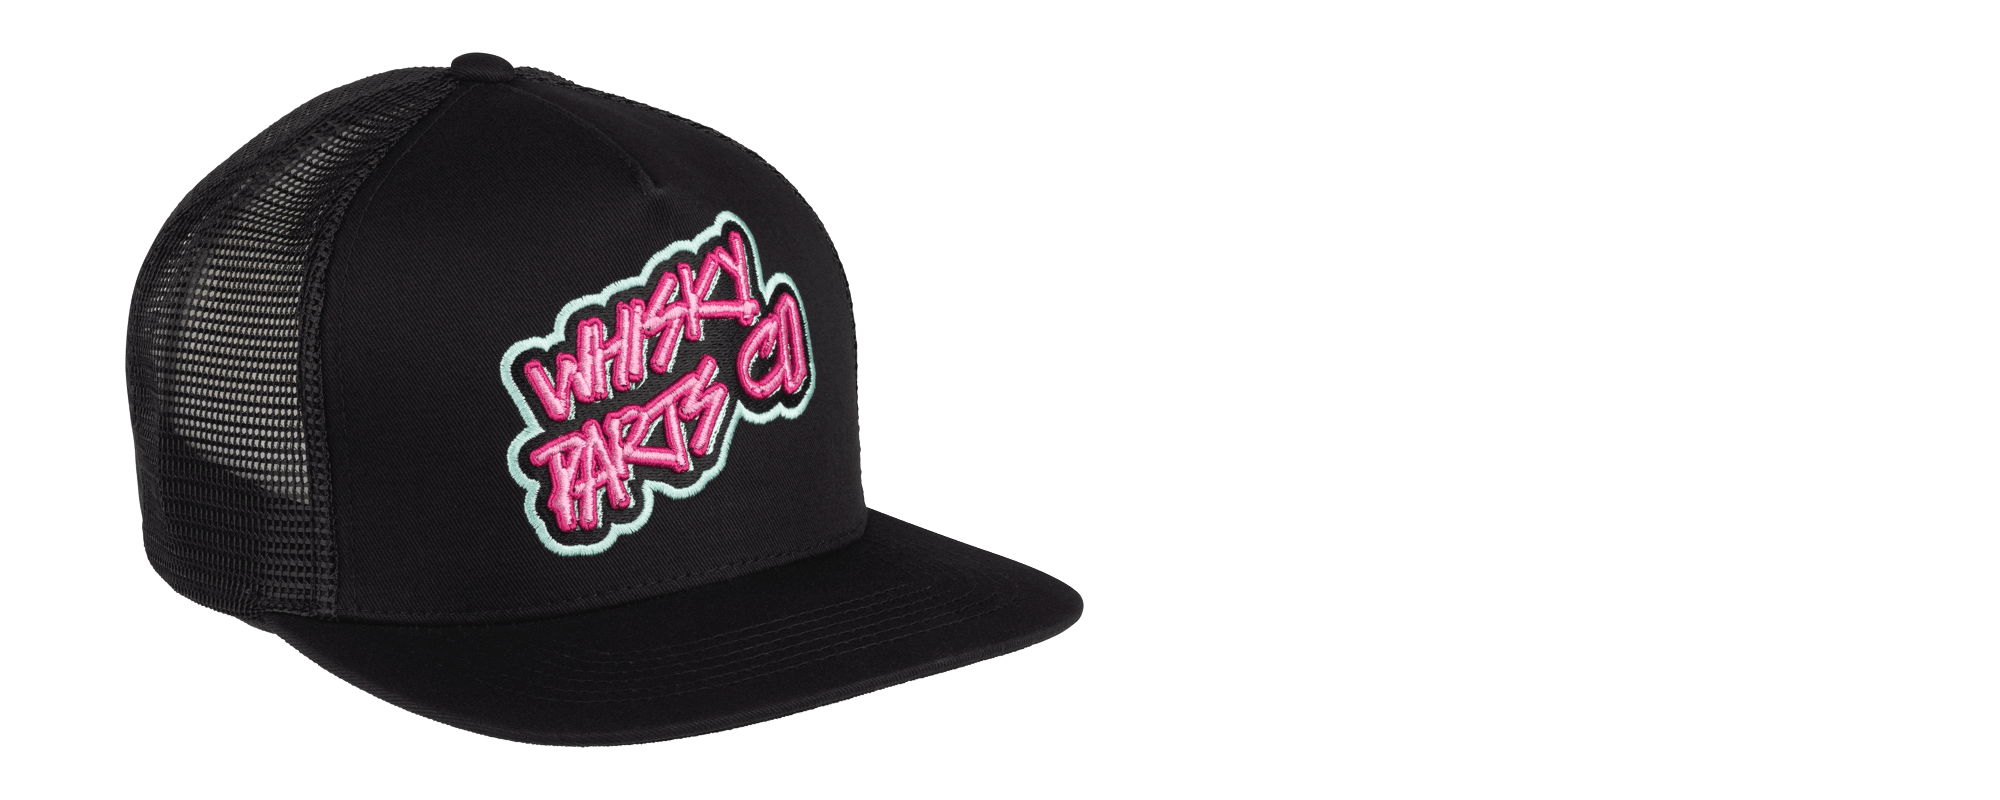 Whisky It's the 90s Hat - Black - Front three quarter view